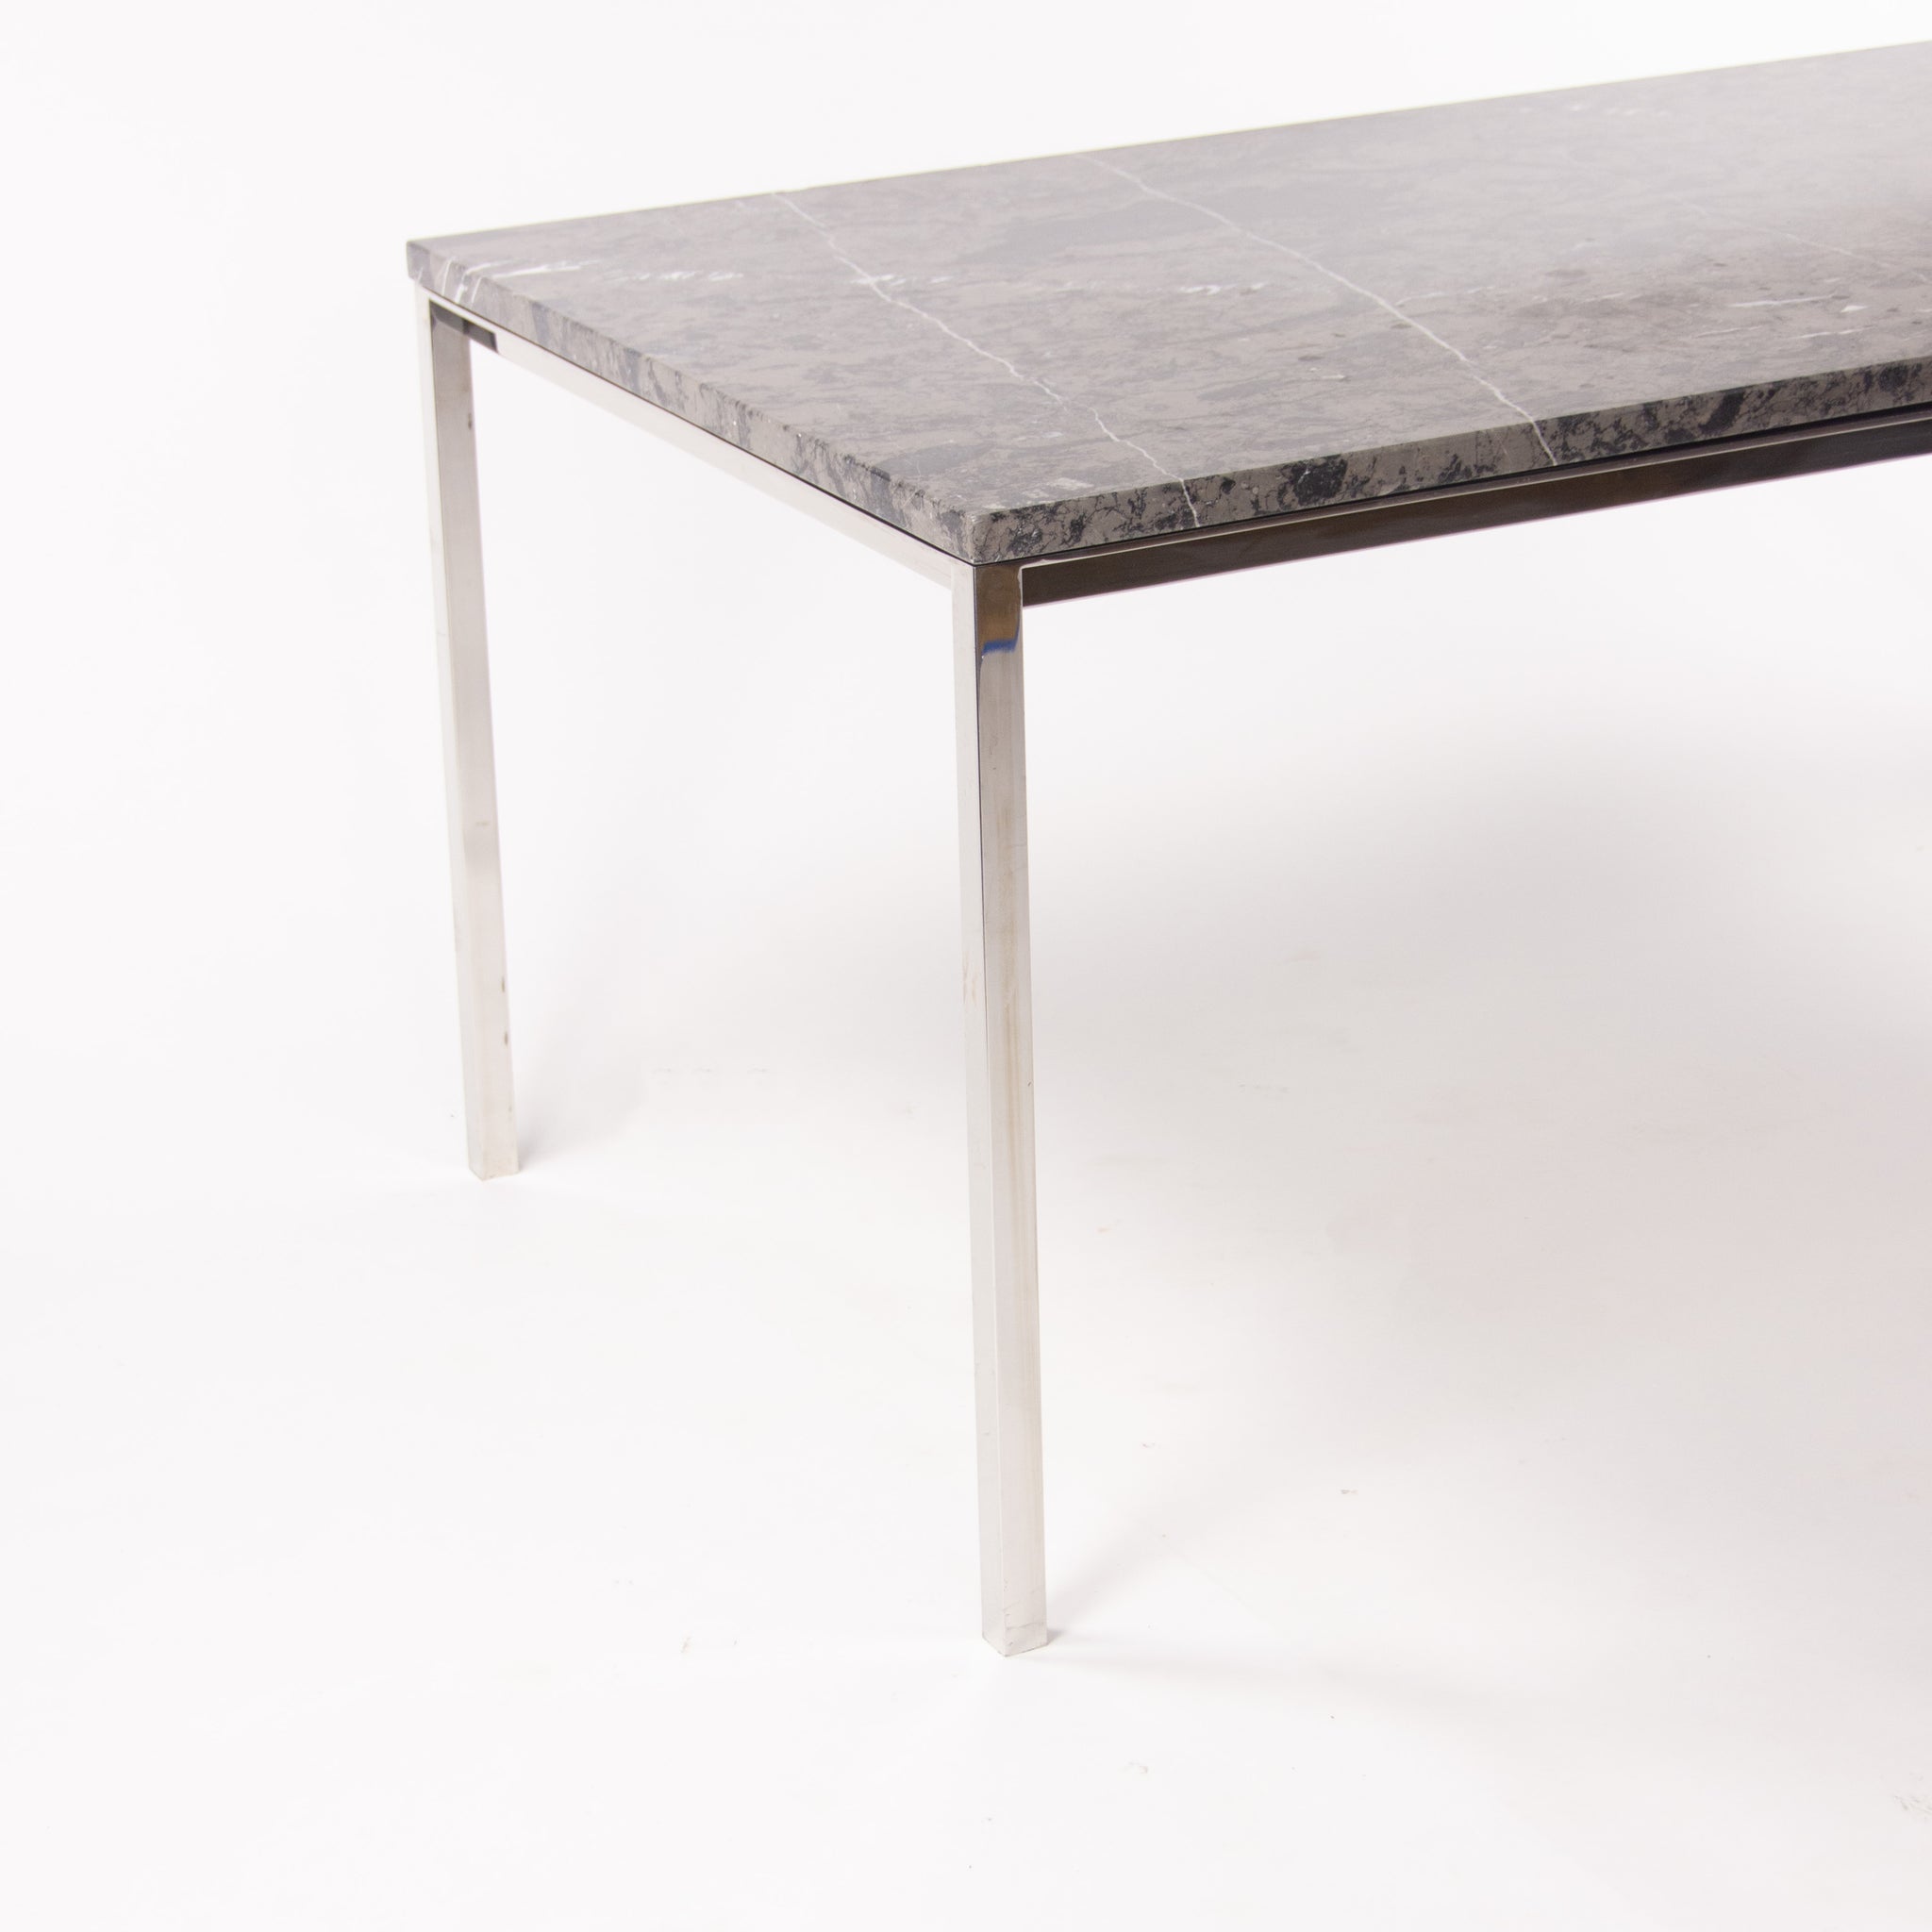 SOLD Gray Marble 2011 Cumberland Meeting Dining Table Desk w/ Stainless Base Knoll